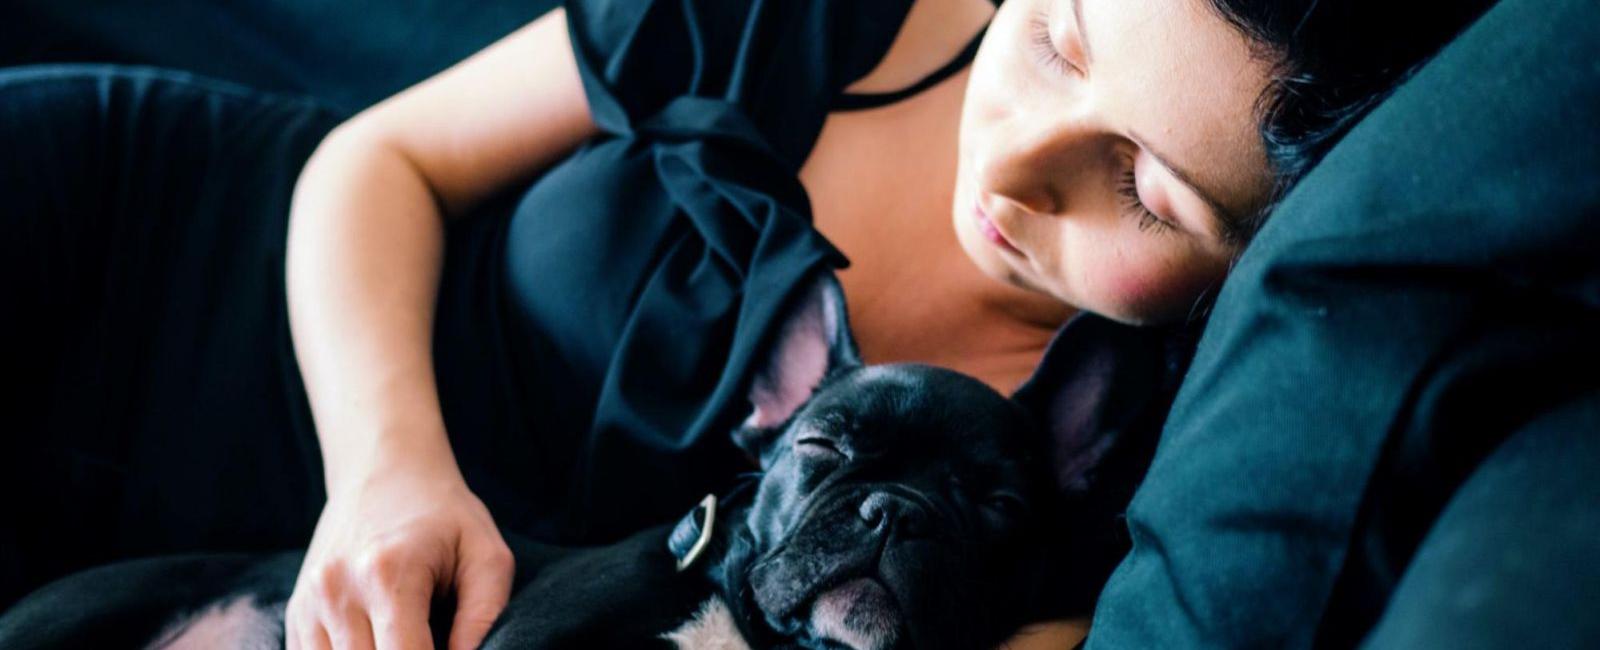 Your Dog Won't Sleep Without You? Here's Why & How to Help Your Pet Sleep Independently